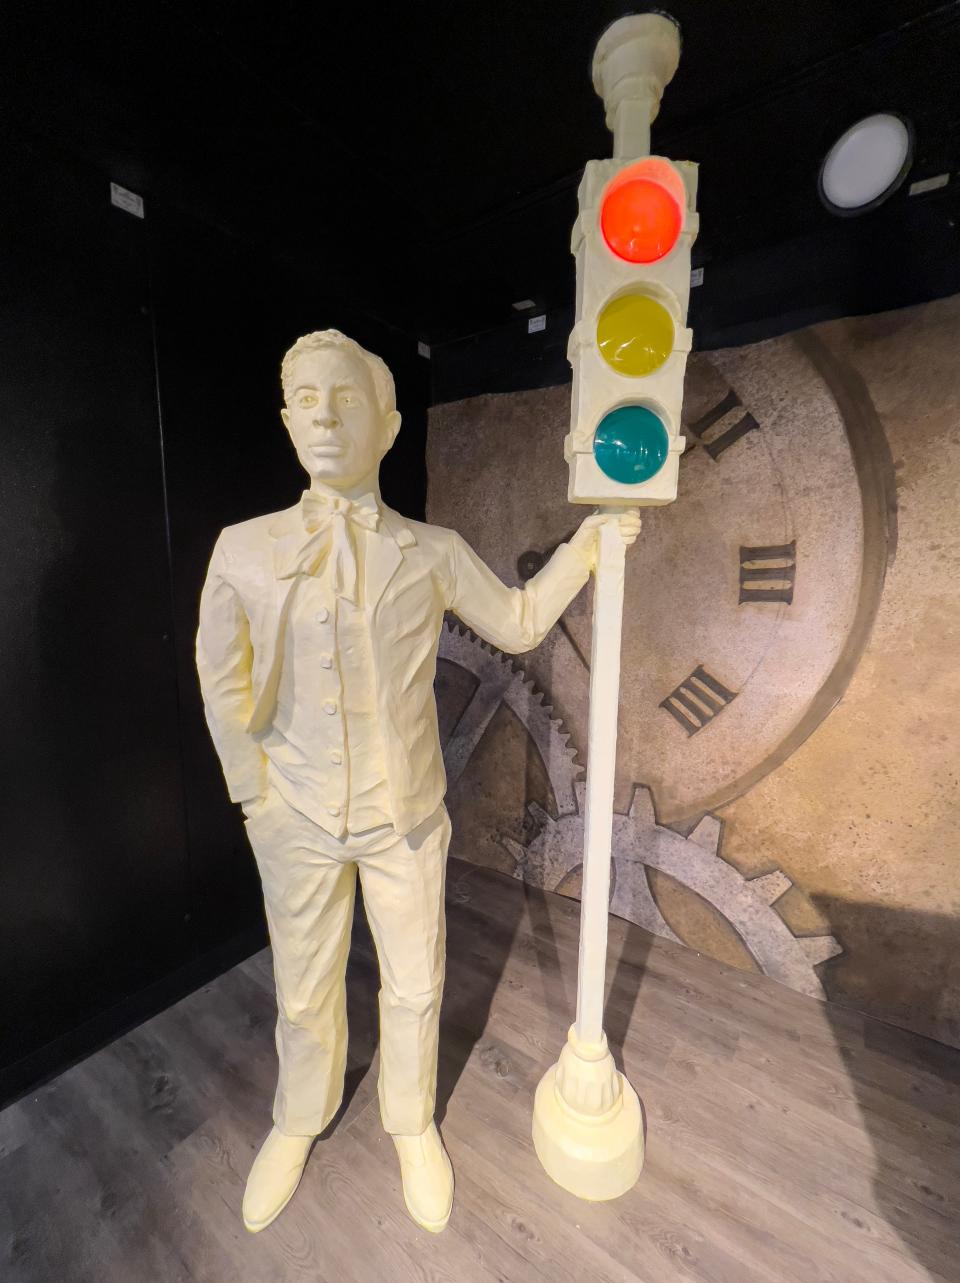 Sculptors used electricity in the butter sculpture of Garrett Morgan and his invention, the three-position traffic signal.